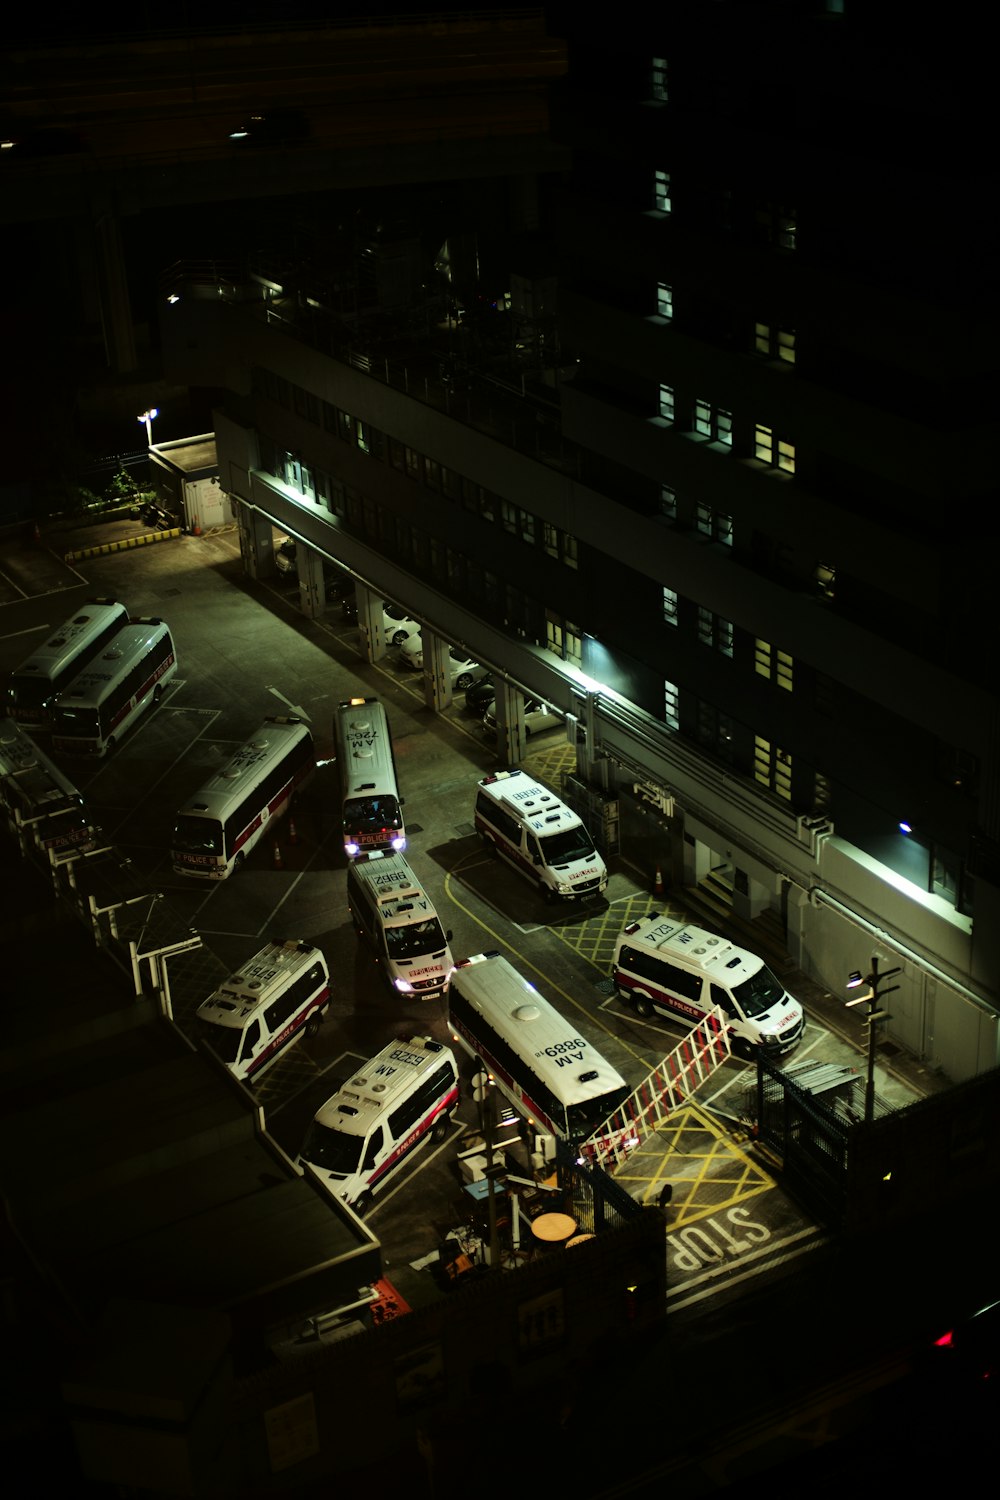 parked vehicles at night